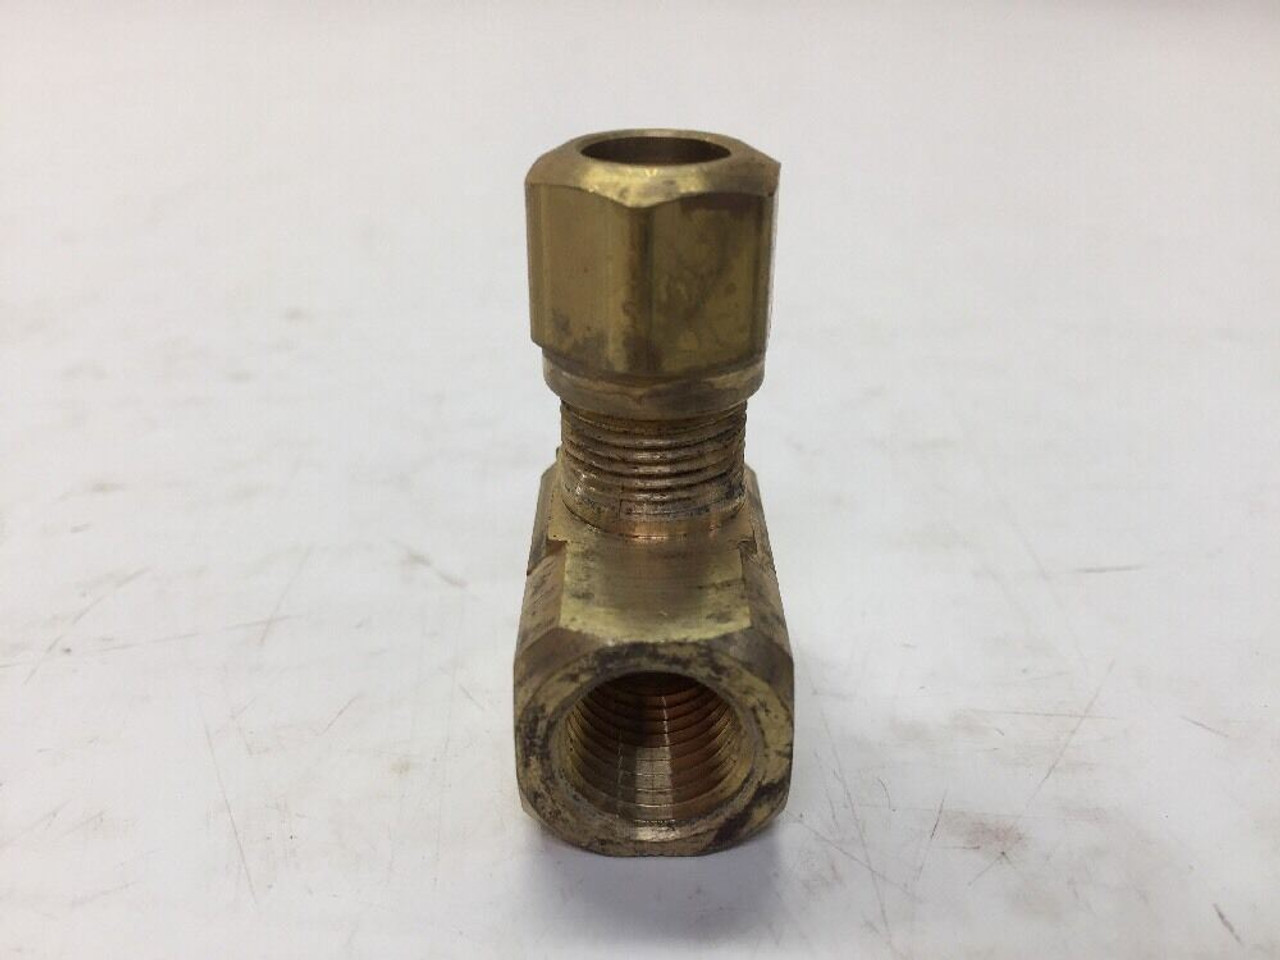 Pipe To Tube Elbow Fitting SAE J246 6-4 100203BA